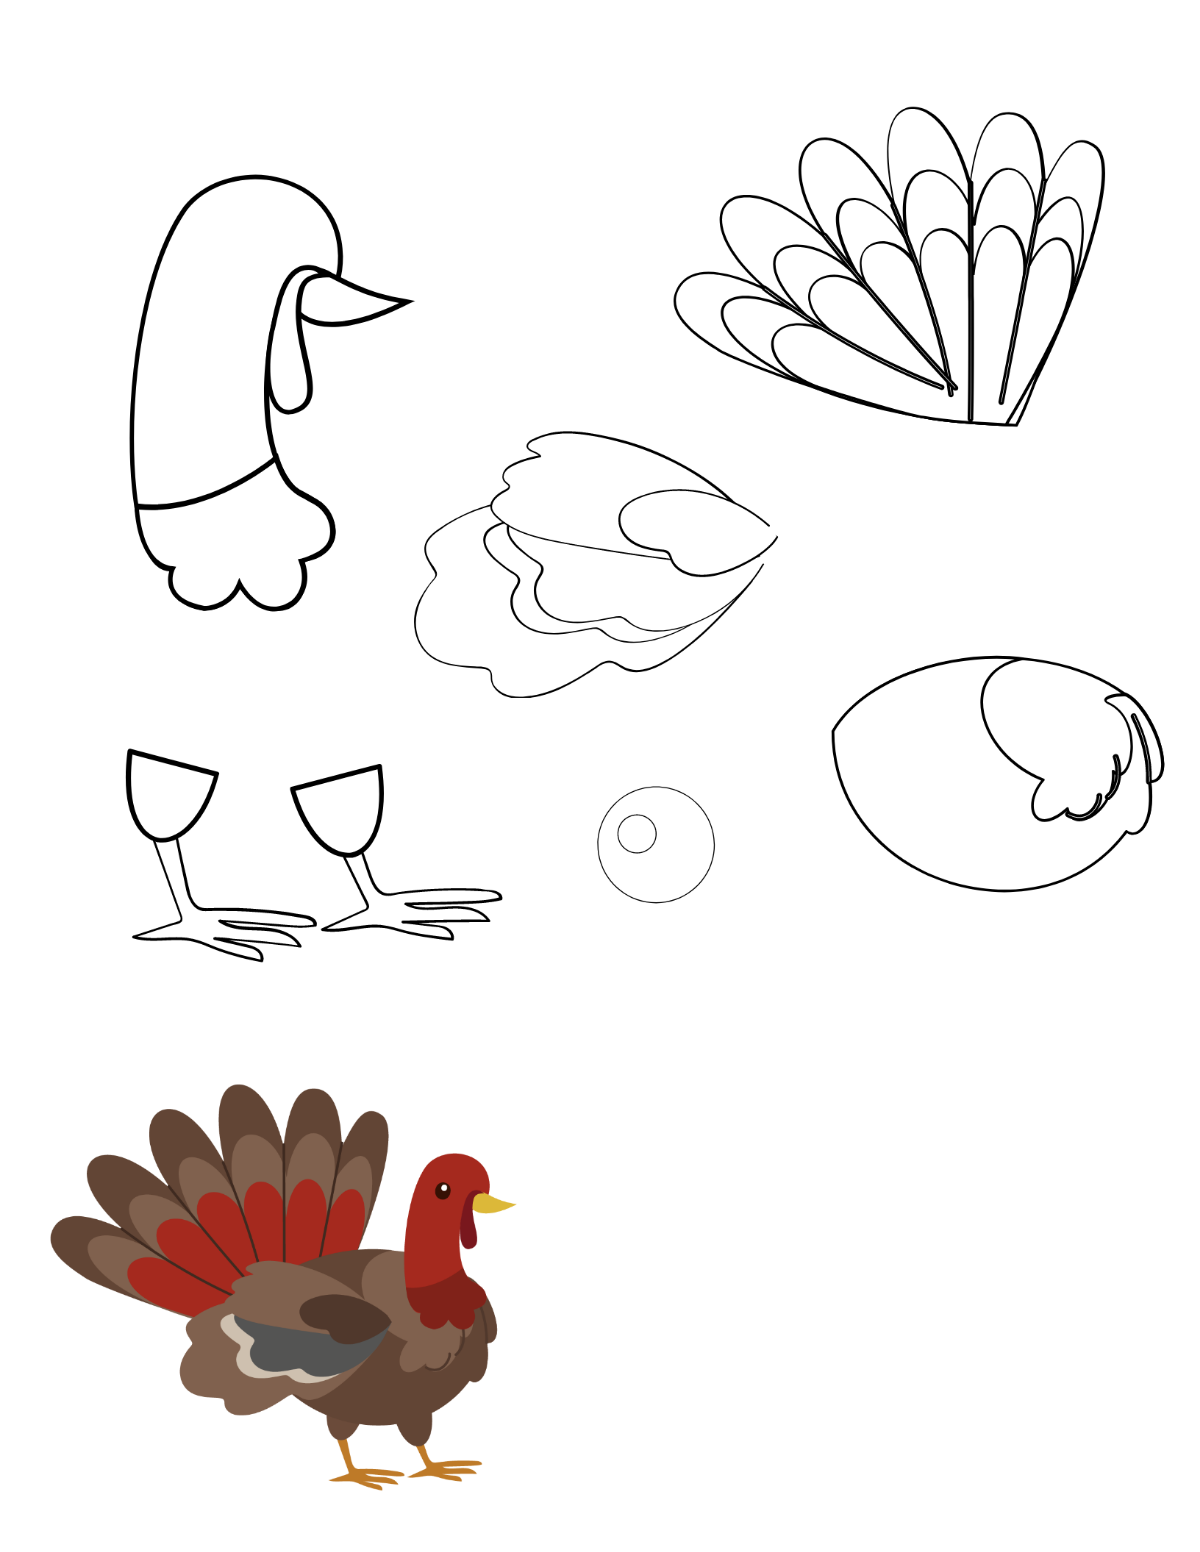 Turkey Cut-out Coloring Page Template